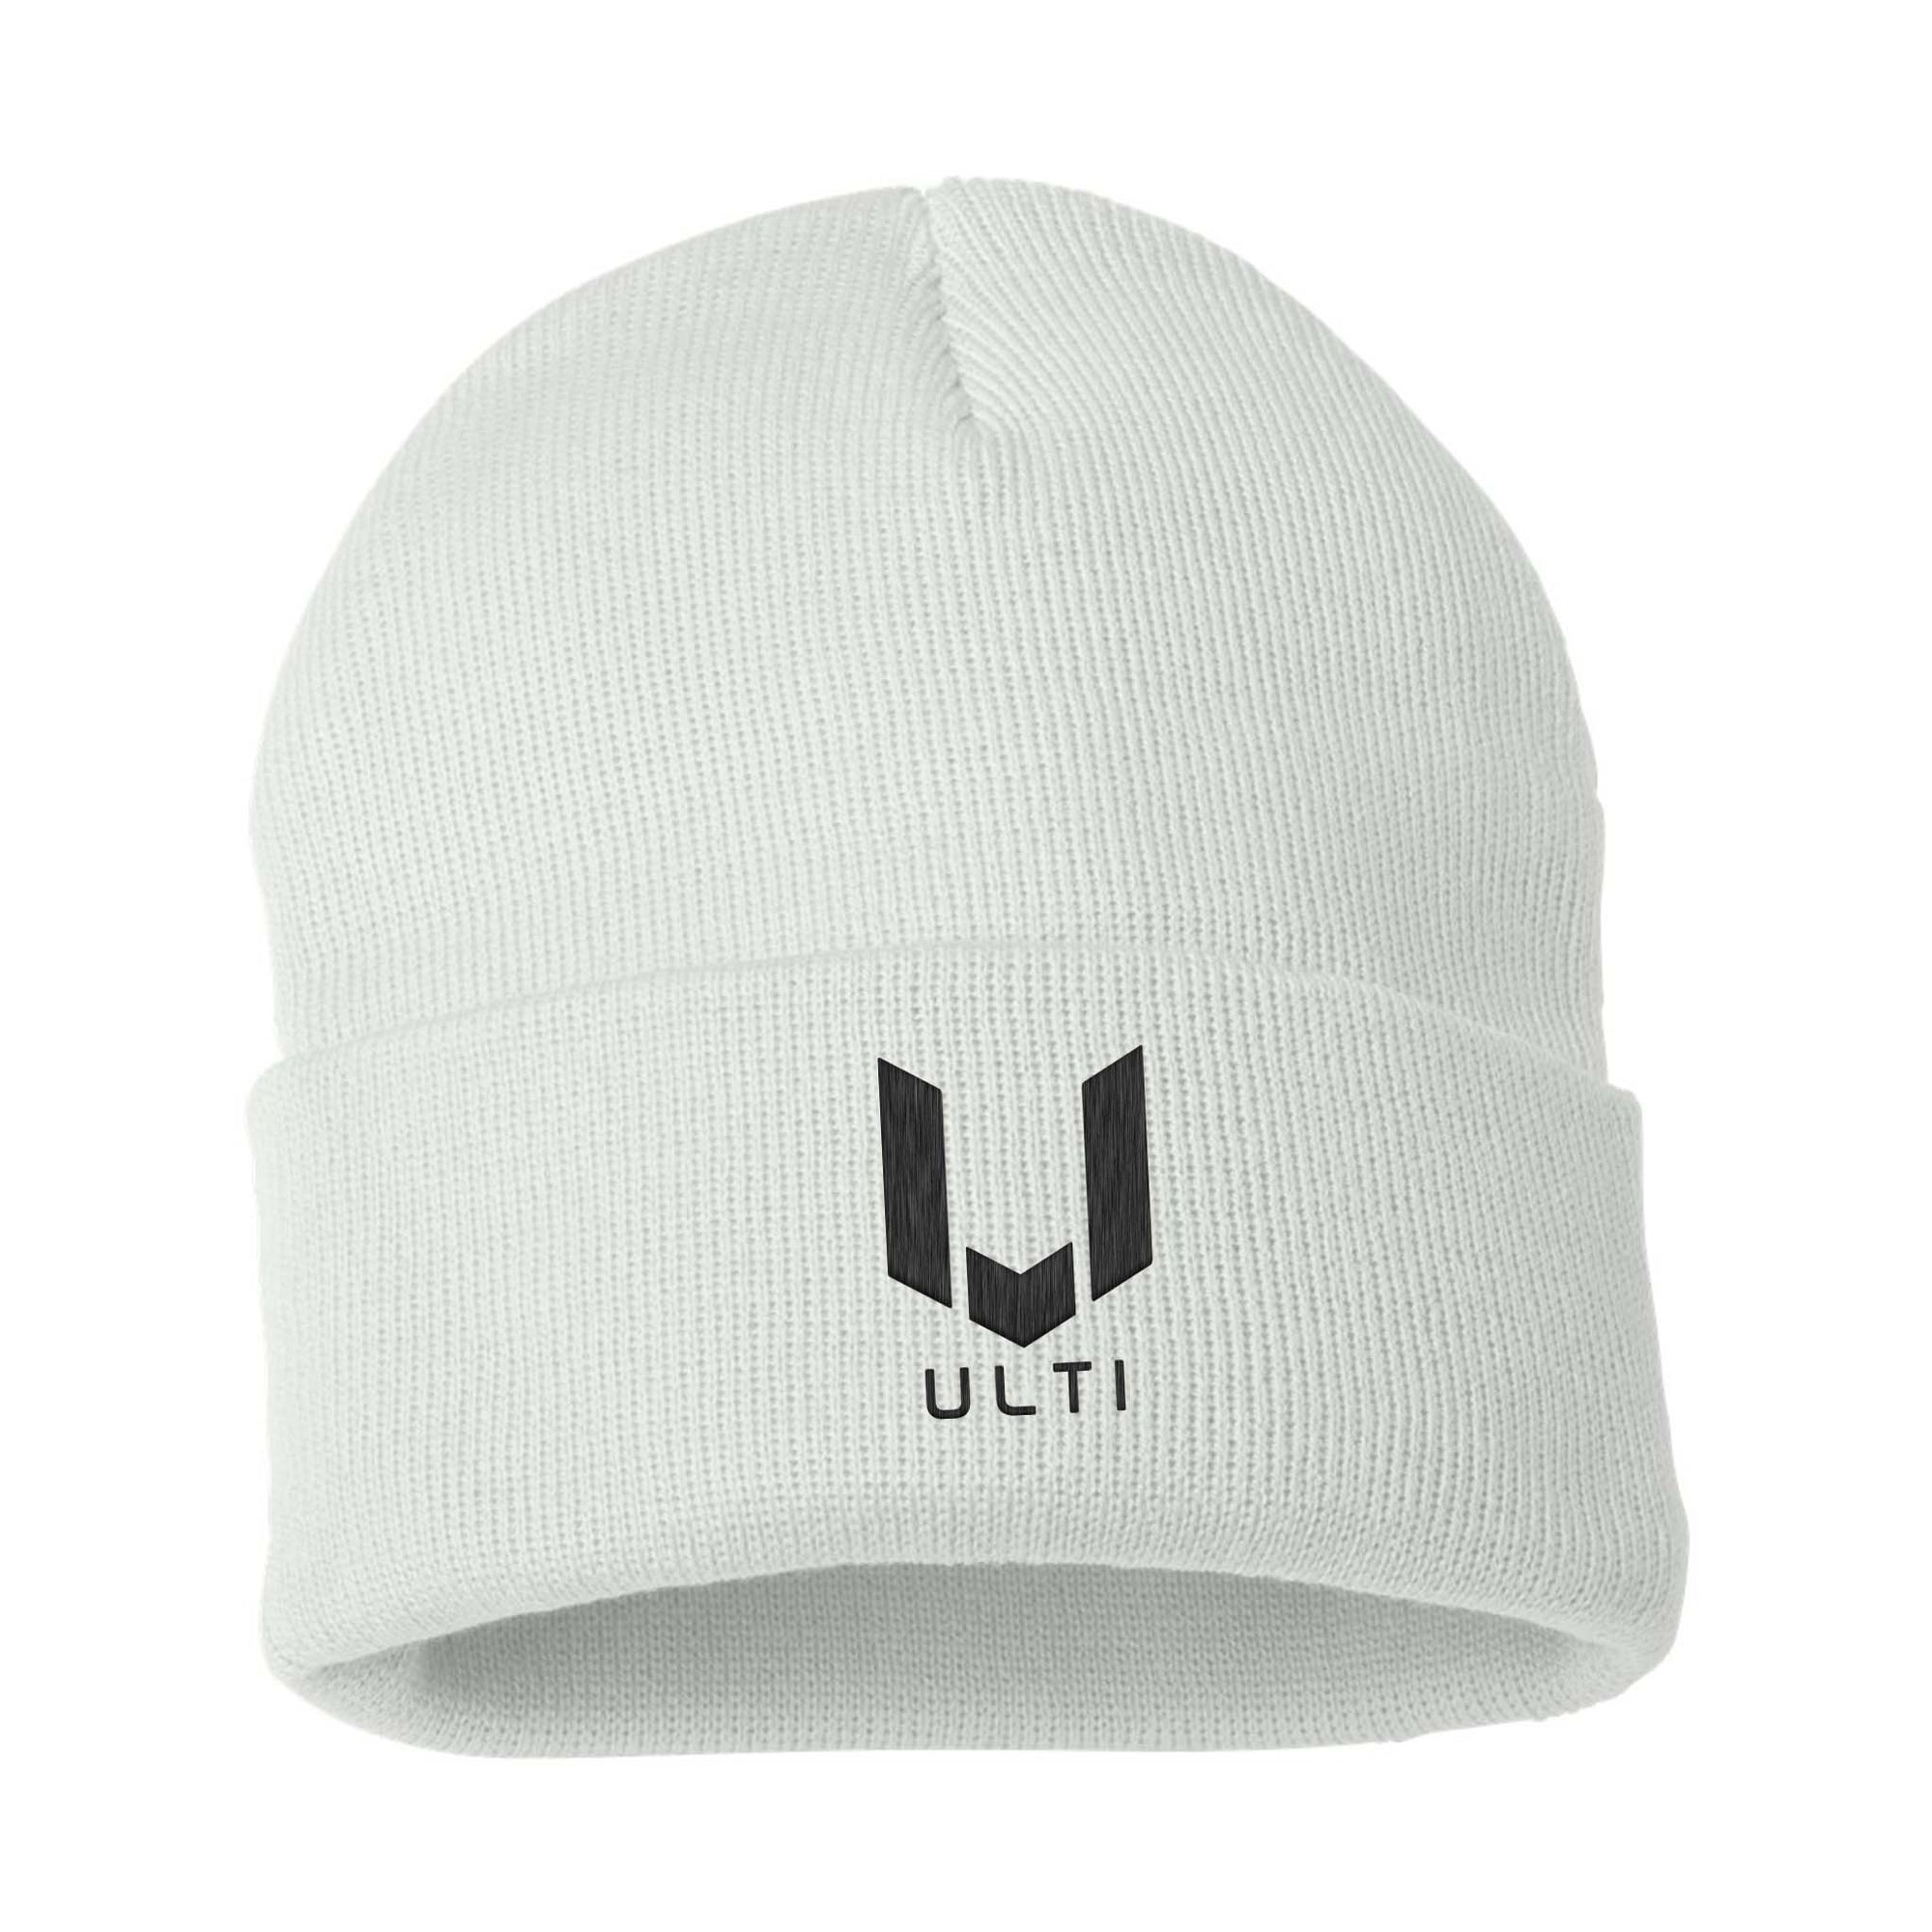 ULTI White Embroidered Beanie